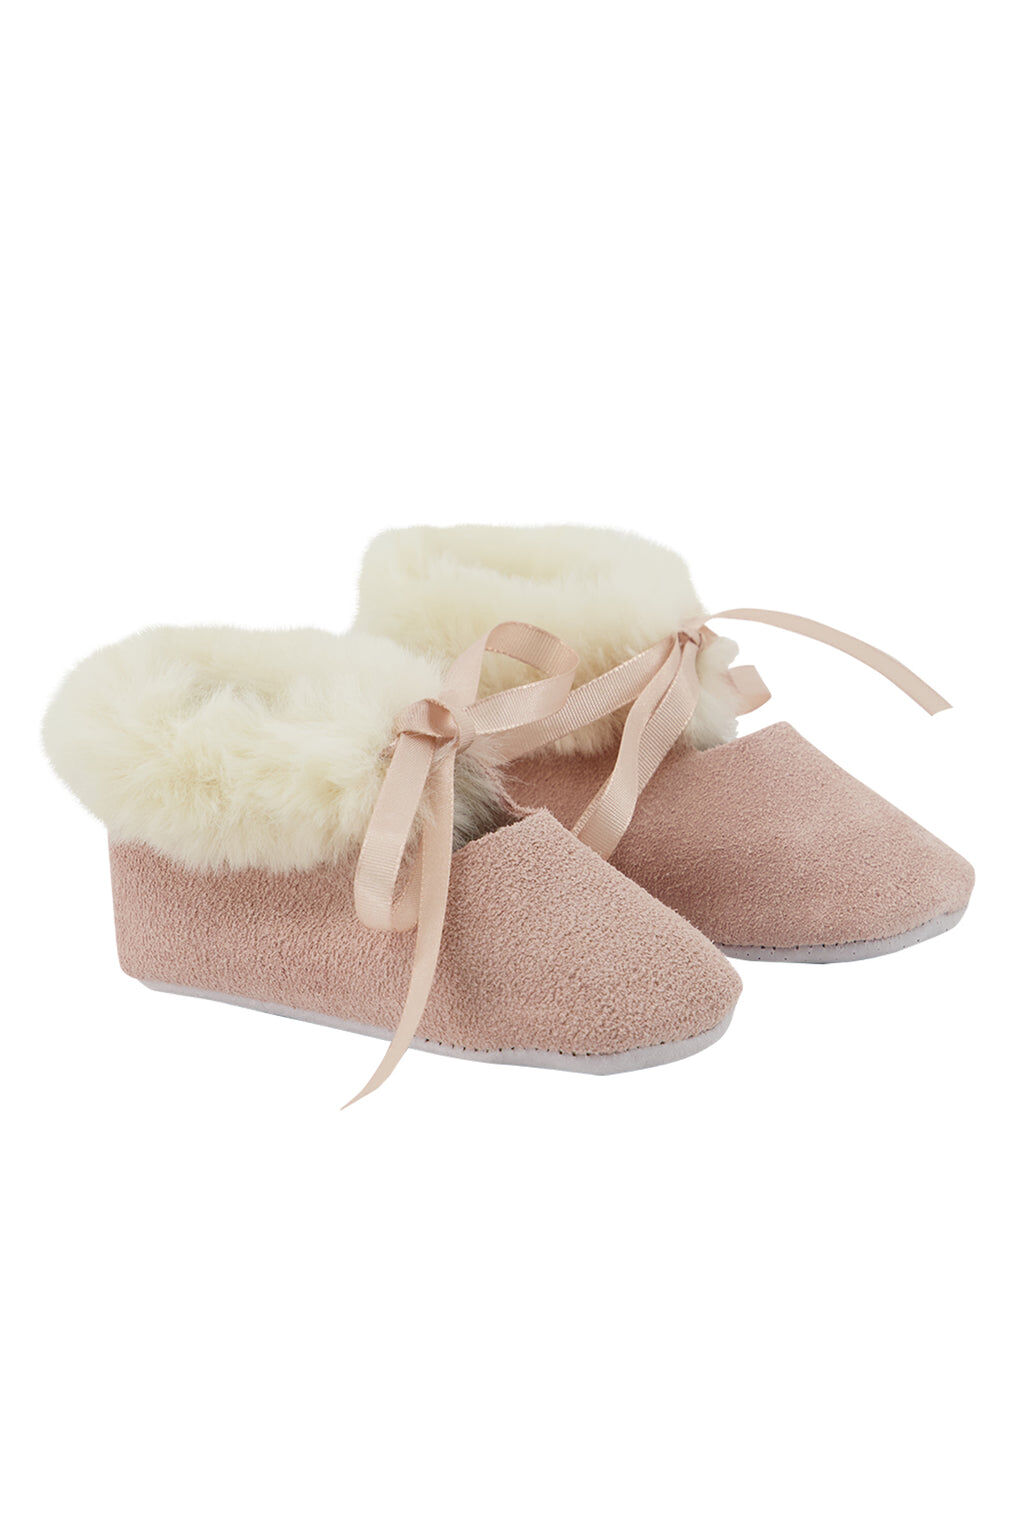 Slippers - Pale pink leather